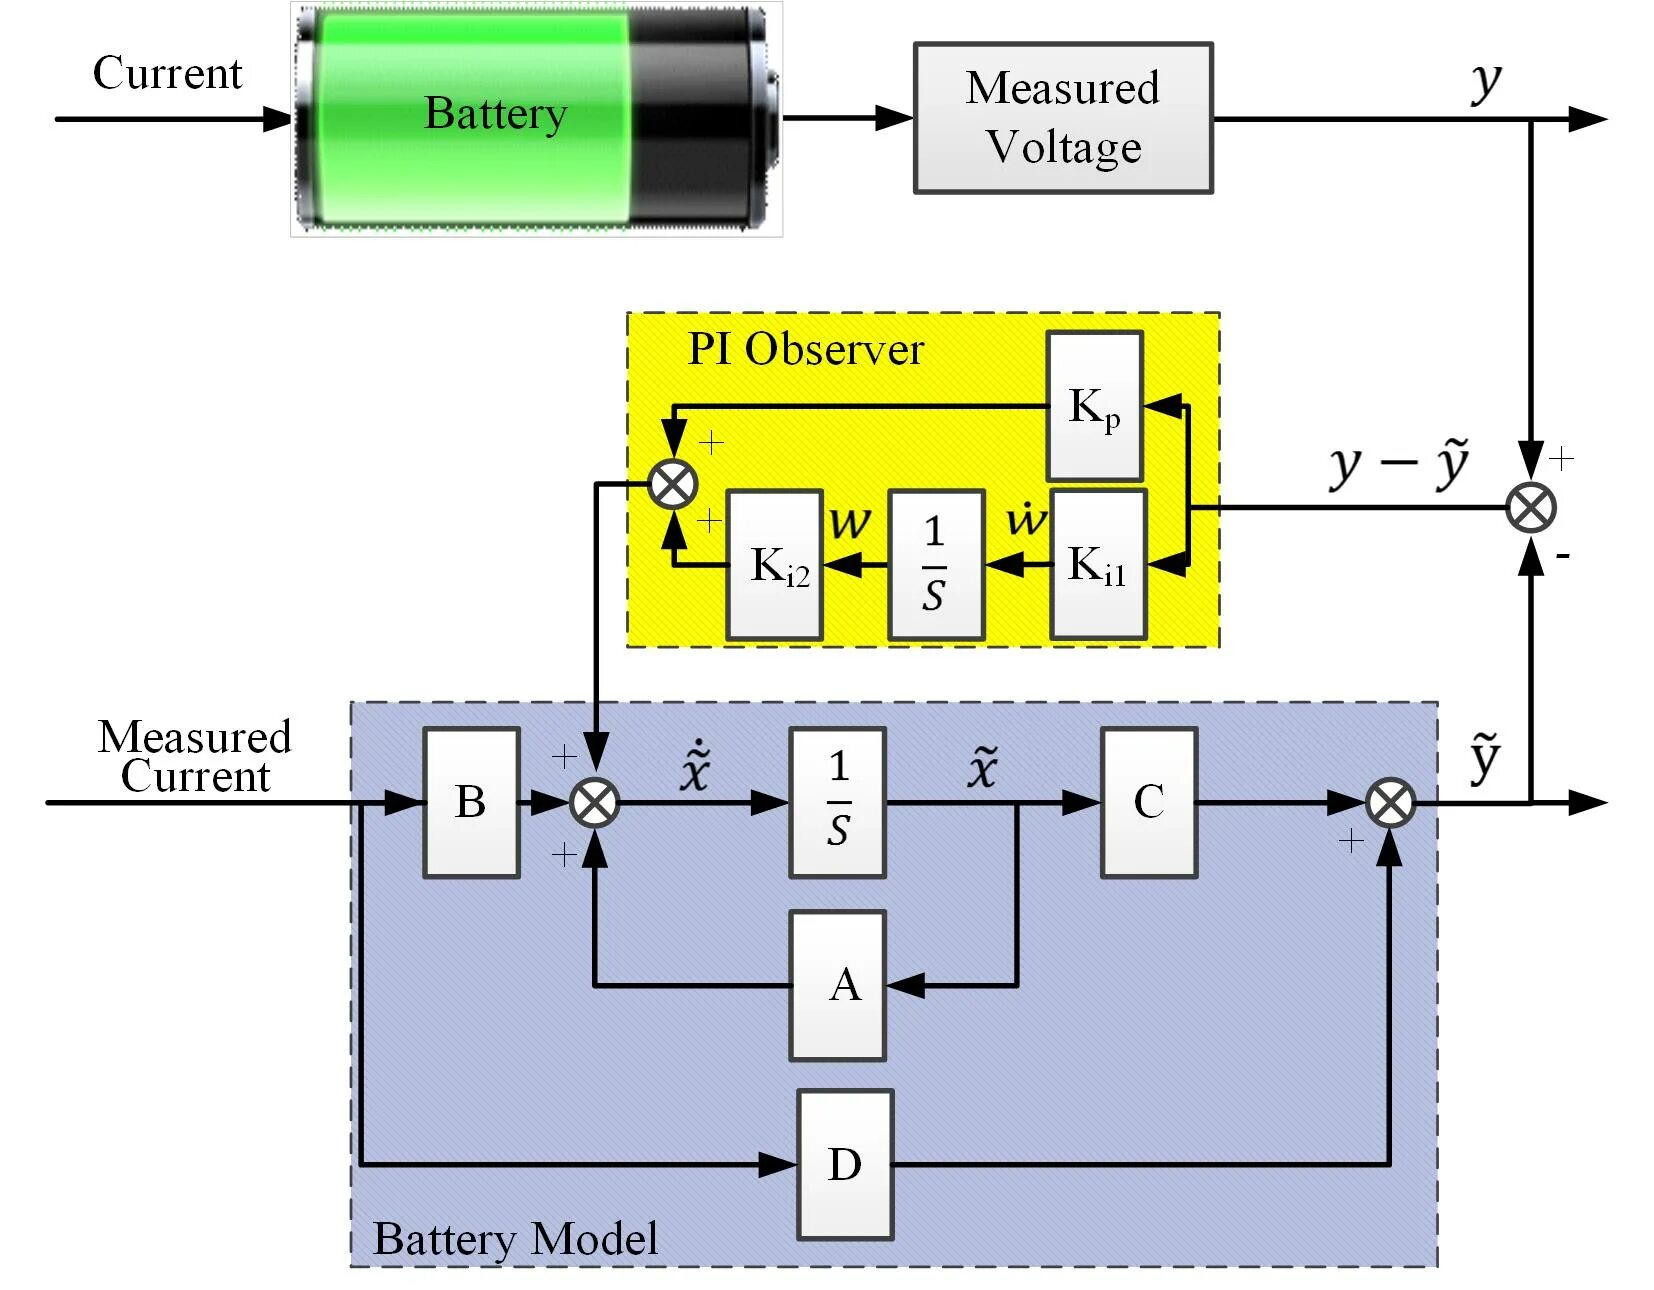 Battery Electric scheme. Electric vehicle Battery. Battery Management System schematic. Battery scheme. Electrical battery